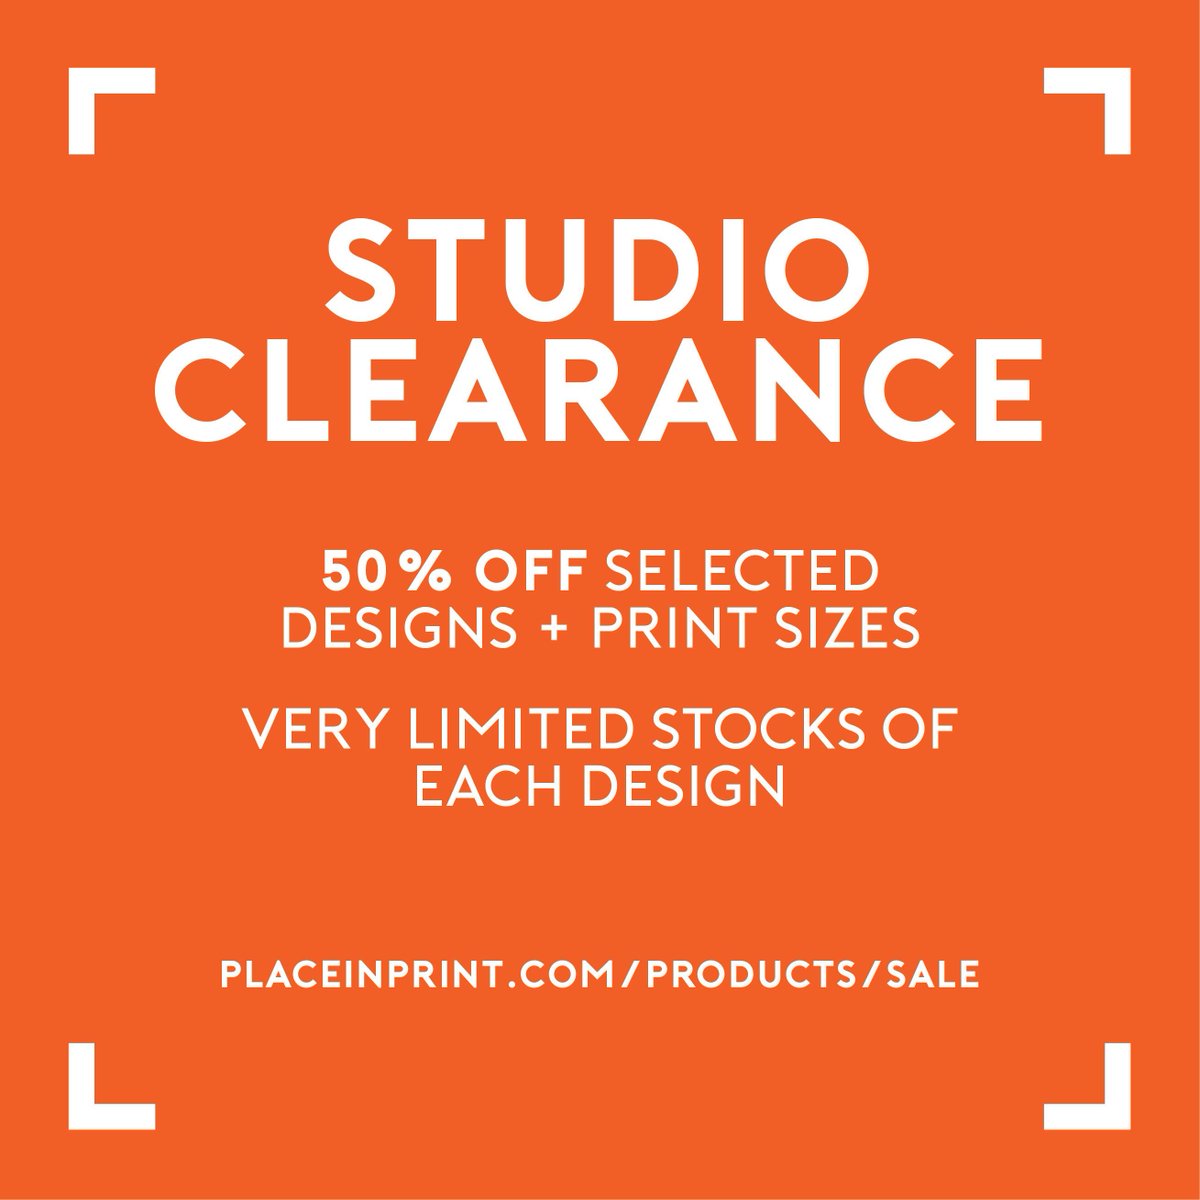 /// STUDIO CLEARANCE /// We have just launched our first ever studio clearance, offering a whopping 50% off standard prices as we do a bit of spring cleaning in preparation for the year ahead. V. limited stock of each design. buff.ly/48IS50L